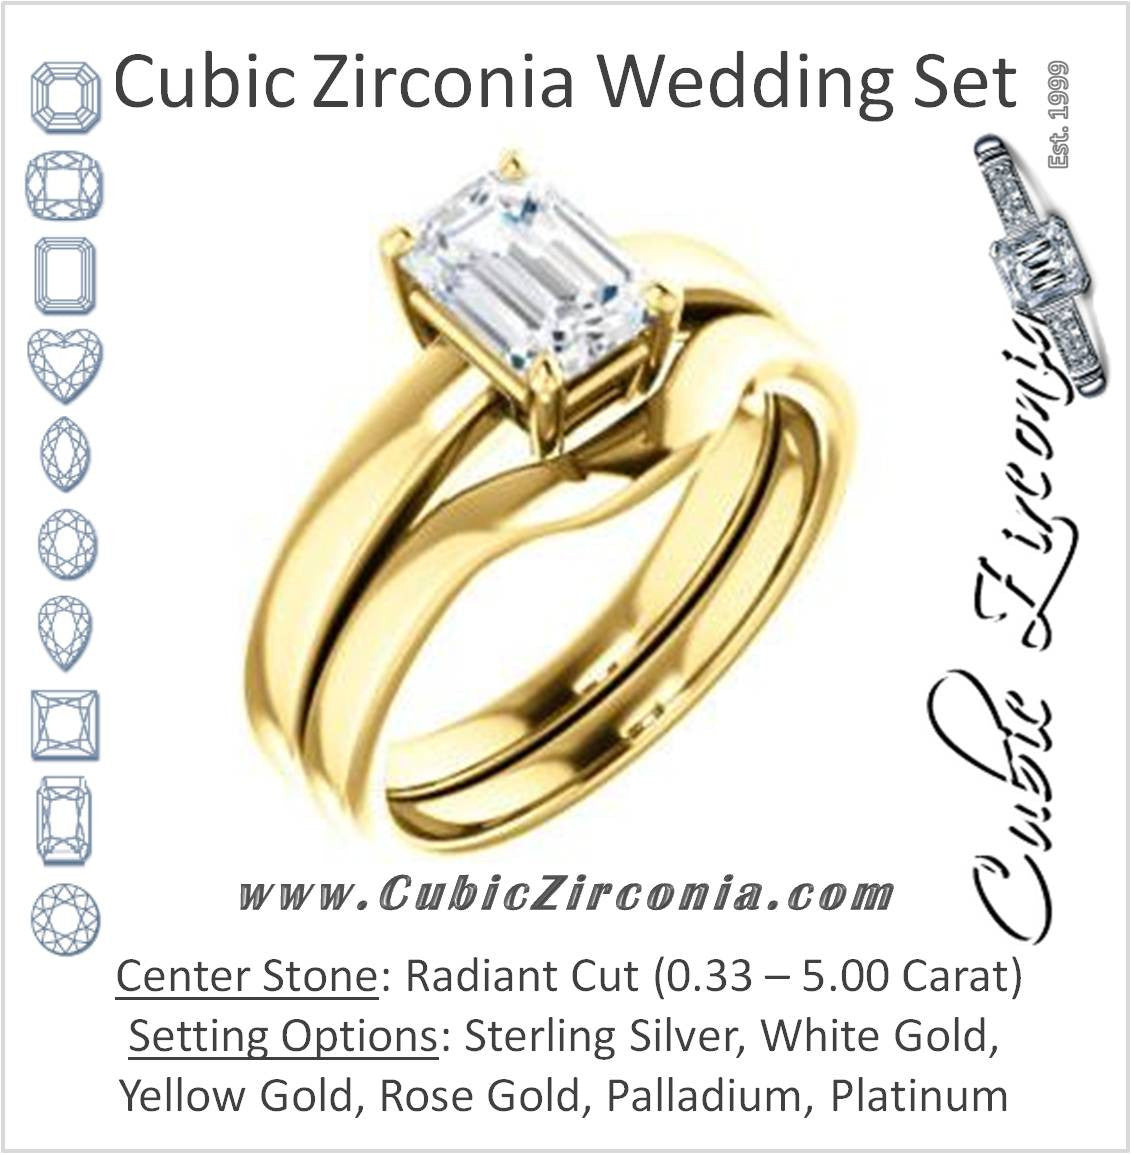 CZ Wedding Set, featuring The Myaka engagement ring (Customizable Radiant Cut Solitaire with Medium Band)